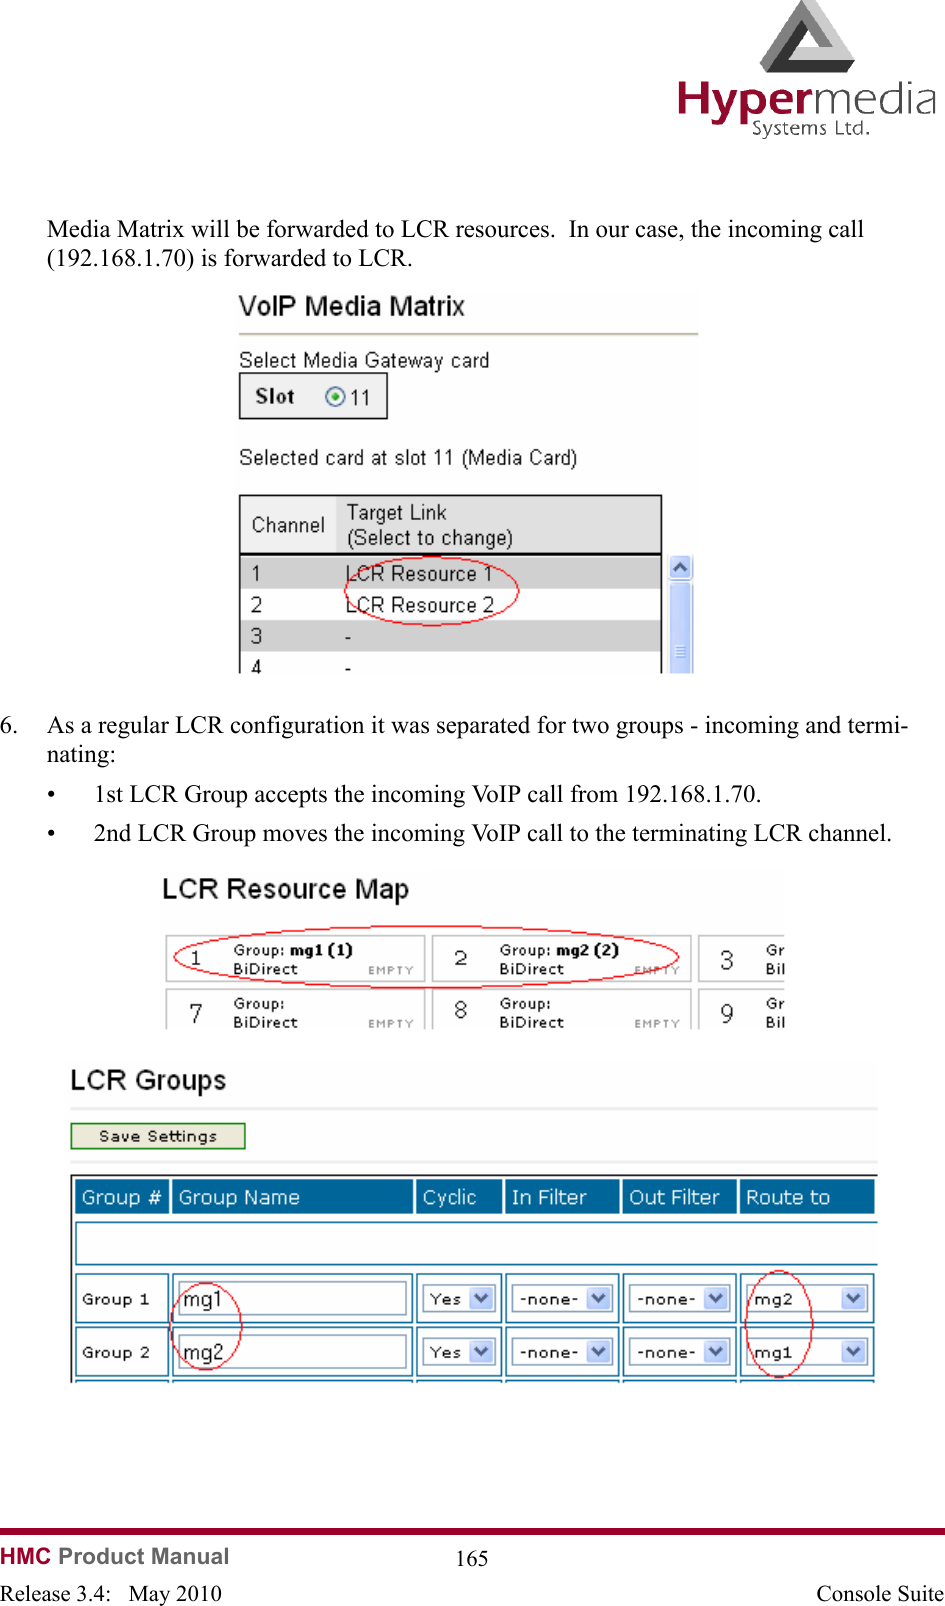 HMC Product Manual  165Release 3.4:   May 2010 Console SuiteMedia Matrix will be forwarded to LCR resources.  In our case, the incoming call (192.168.1.70) is forwarded to LCR.              6. As a regular LCR configuration it was separated for two groups - incoming and termi-nating:• 1st LCR Group accepts the incoming VoIP call from 192.168.1.70. • 2nd LCR Group moves the incoming VoIP call to the terminating LCR channel.                            